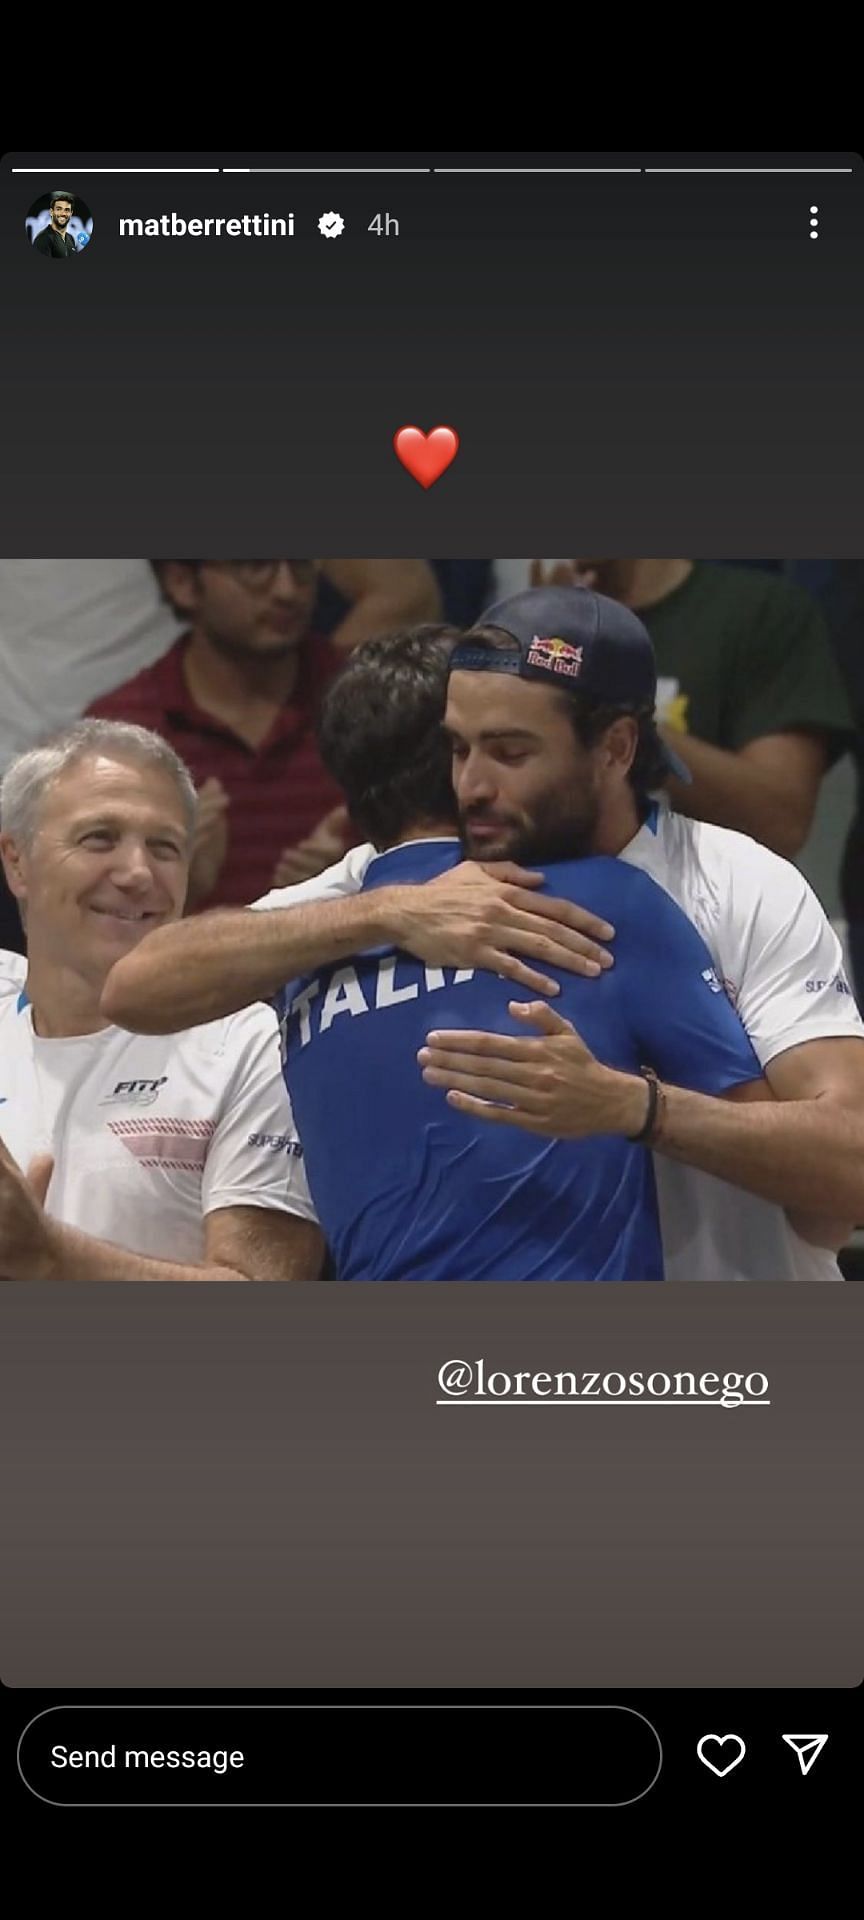 Matteo Berrettini shares a moment with Lorezo Sonego after the laters Davis Cup win